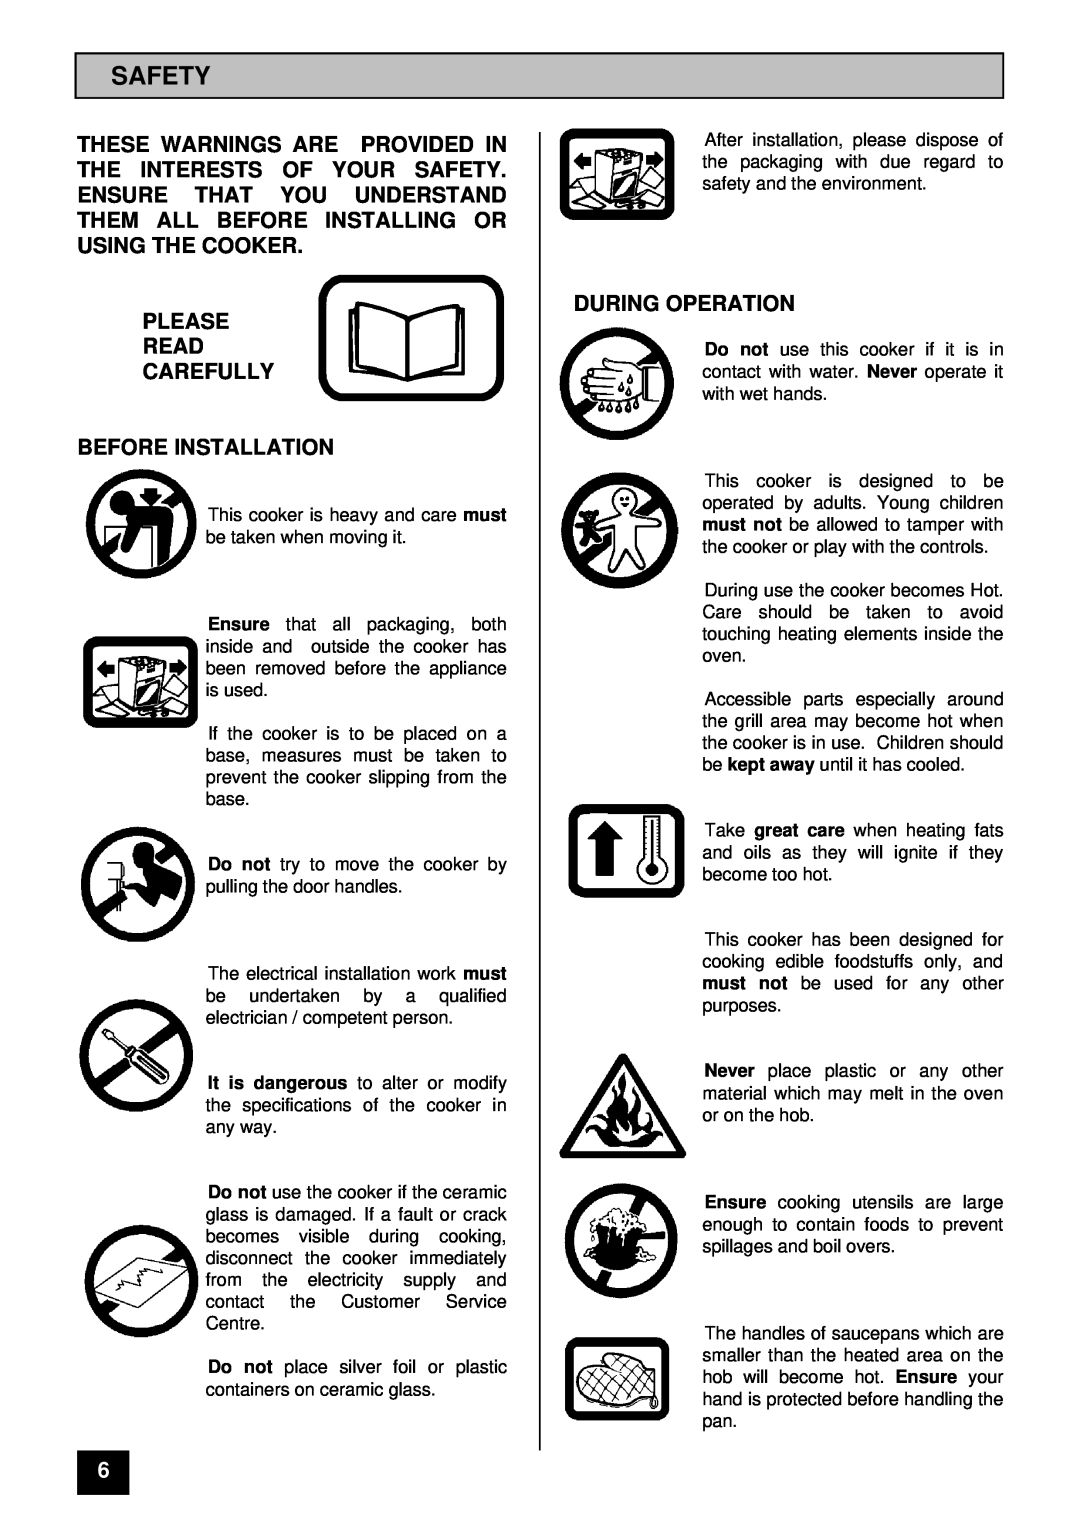 Tricity Bendix RE60GC installation instructions Safety, Please Read Carefully Before Installation, During Operation 